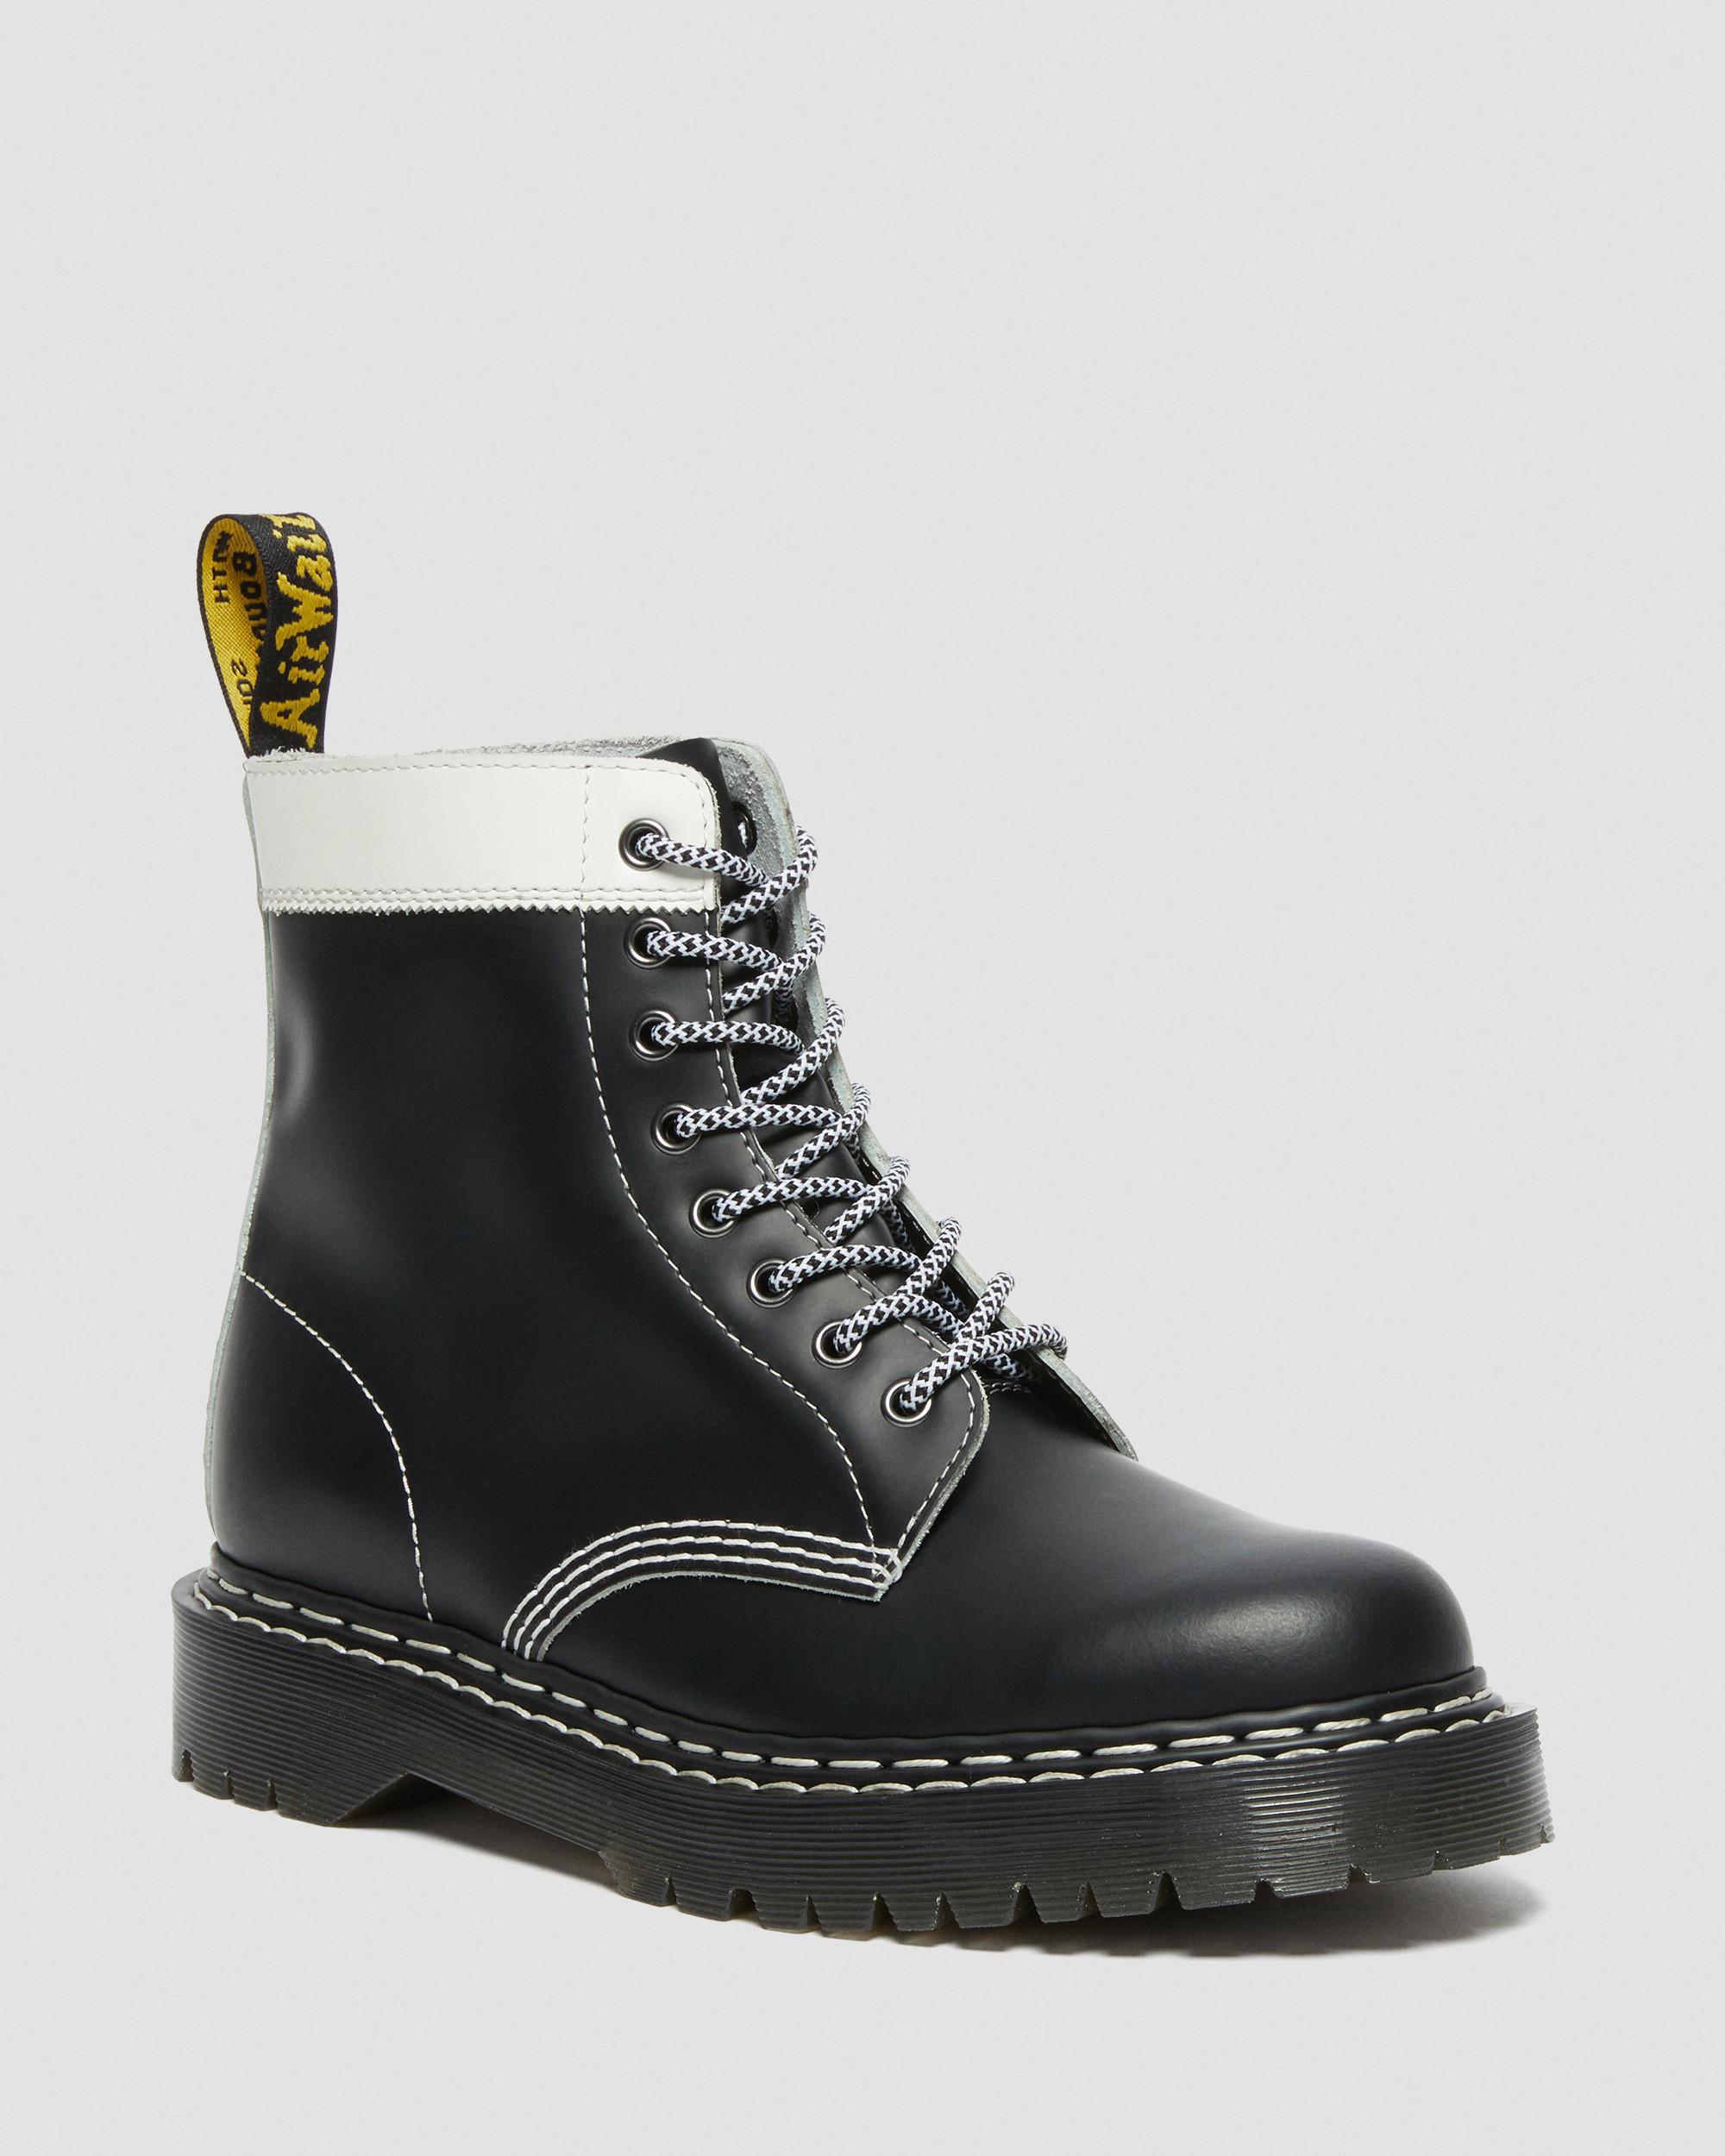 DR MARTENS 1460 Pascal Bex Leather Contrast Lace Up Boots